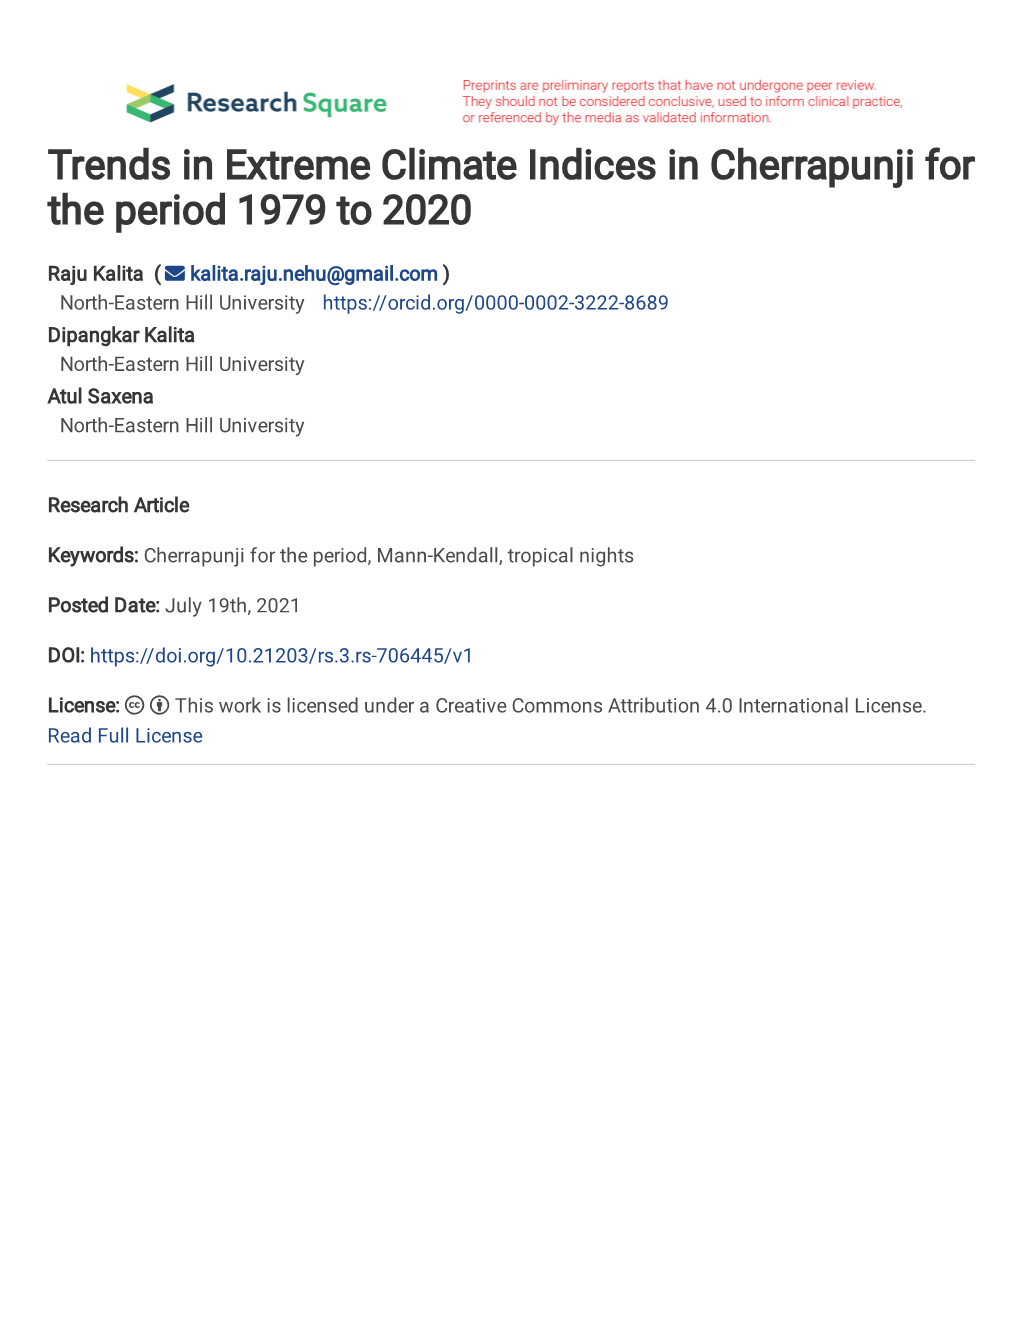 Trends in Extreme Climate Indices in Cherrapunji for the Period 1979 to 2020